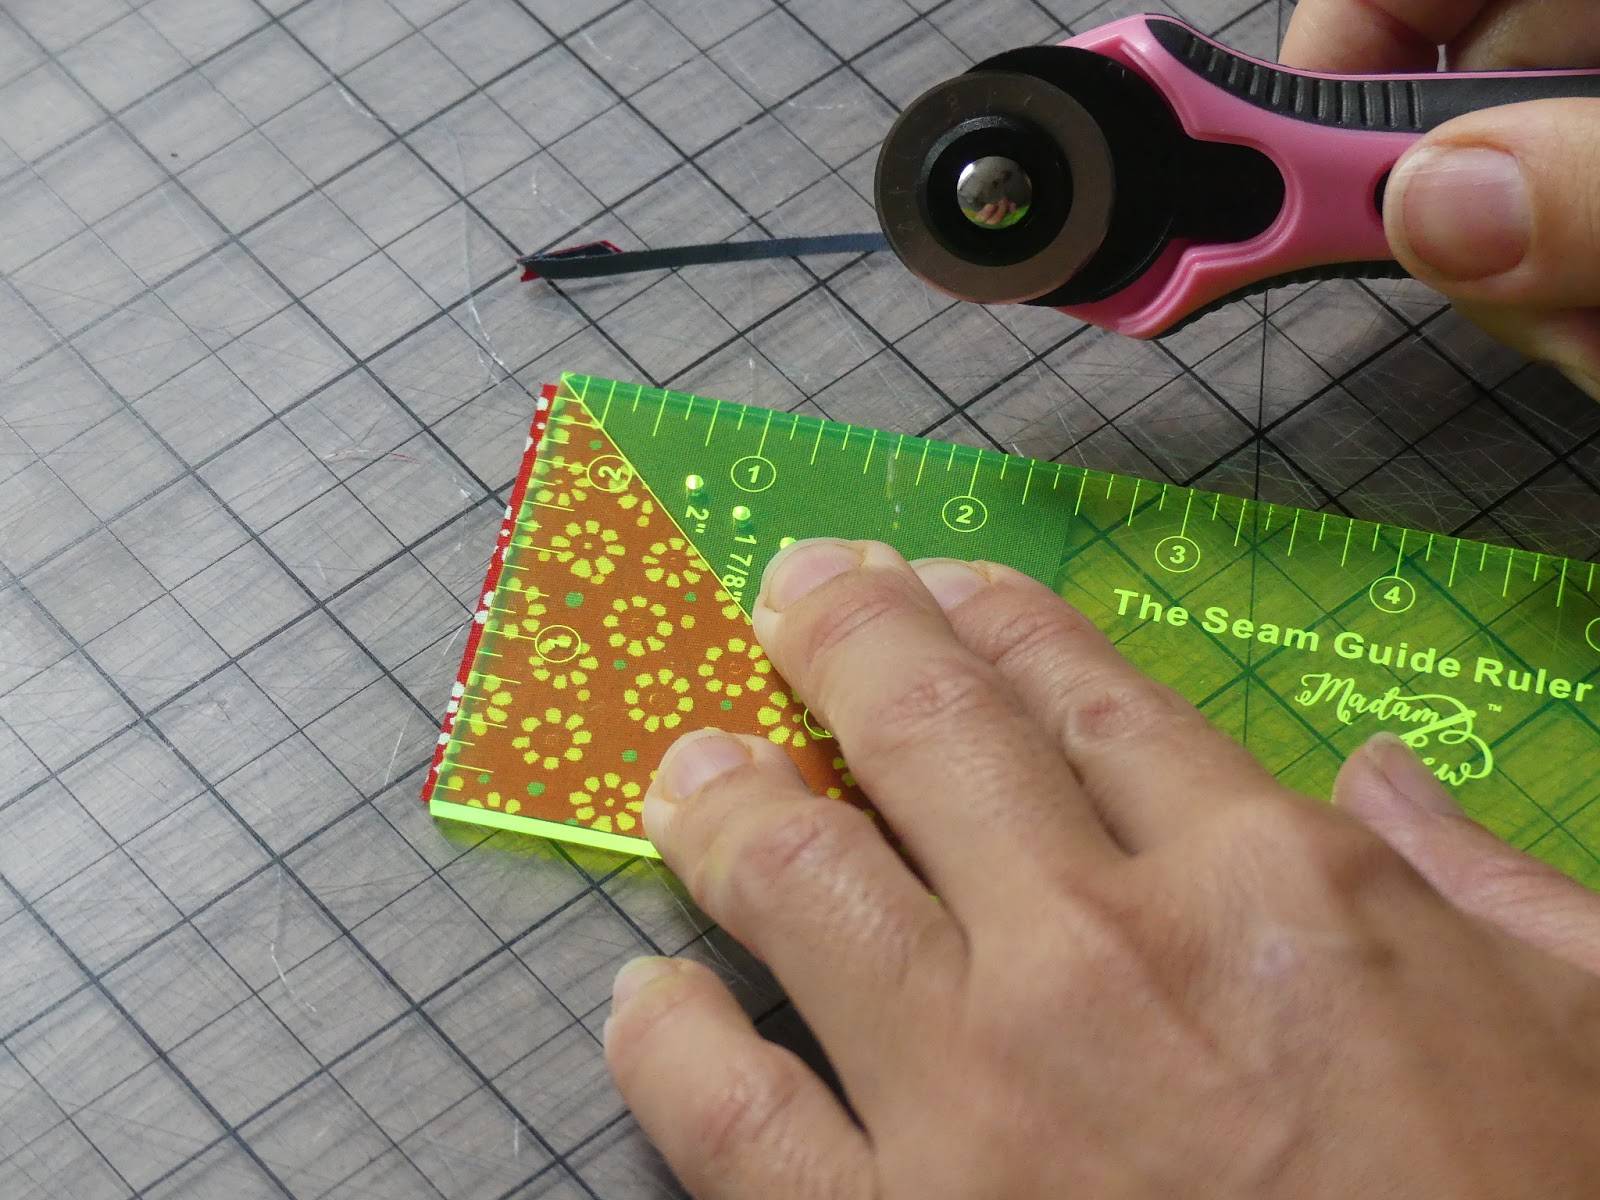 Keep it accurate with these sewing tools for measuring - Elizabeth Made This